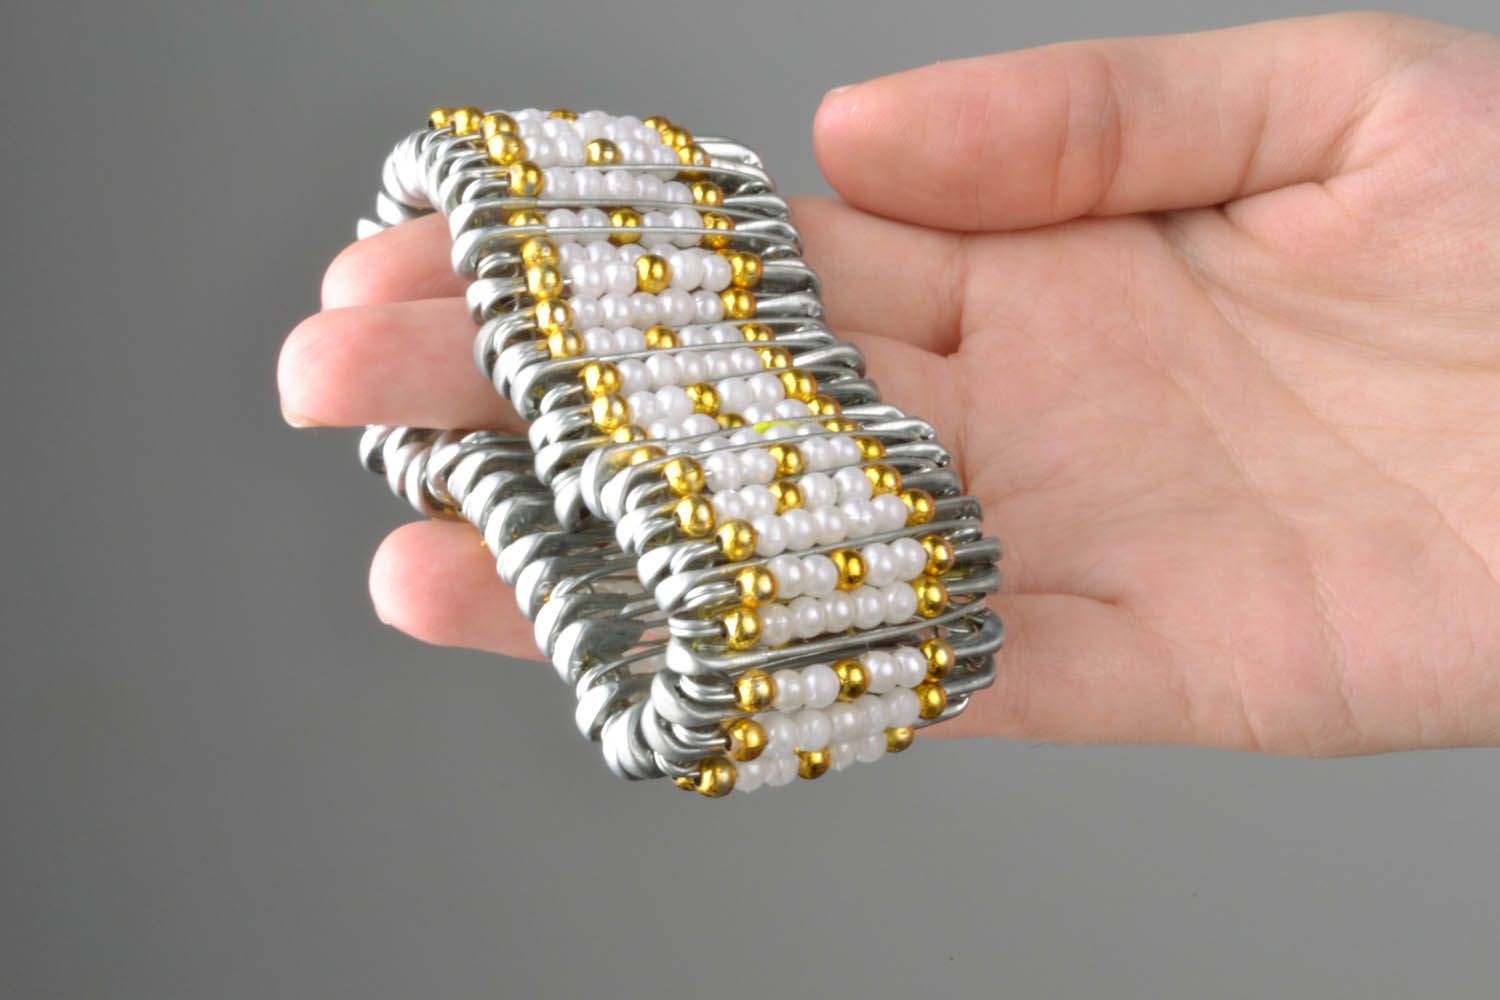 Bracelet made of various pins photo 5